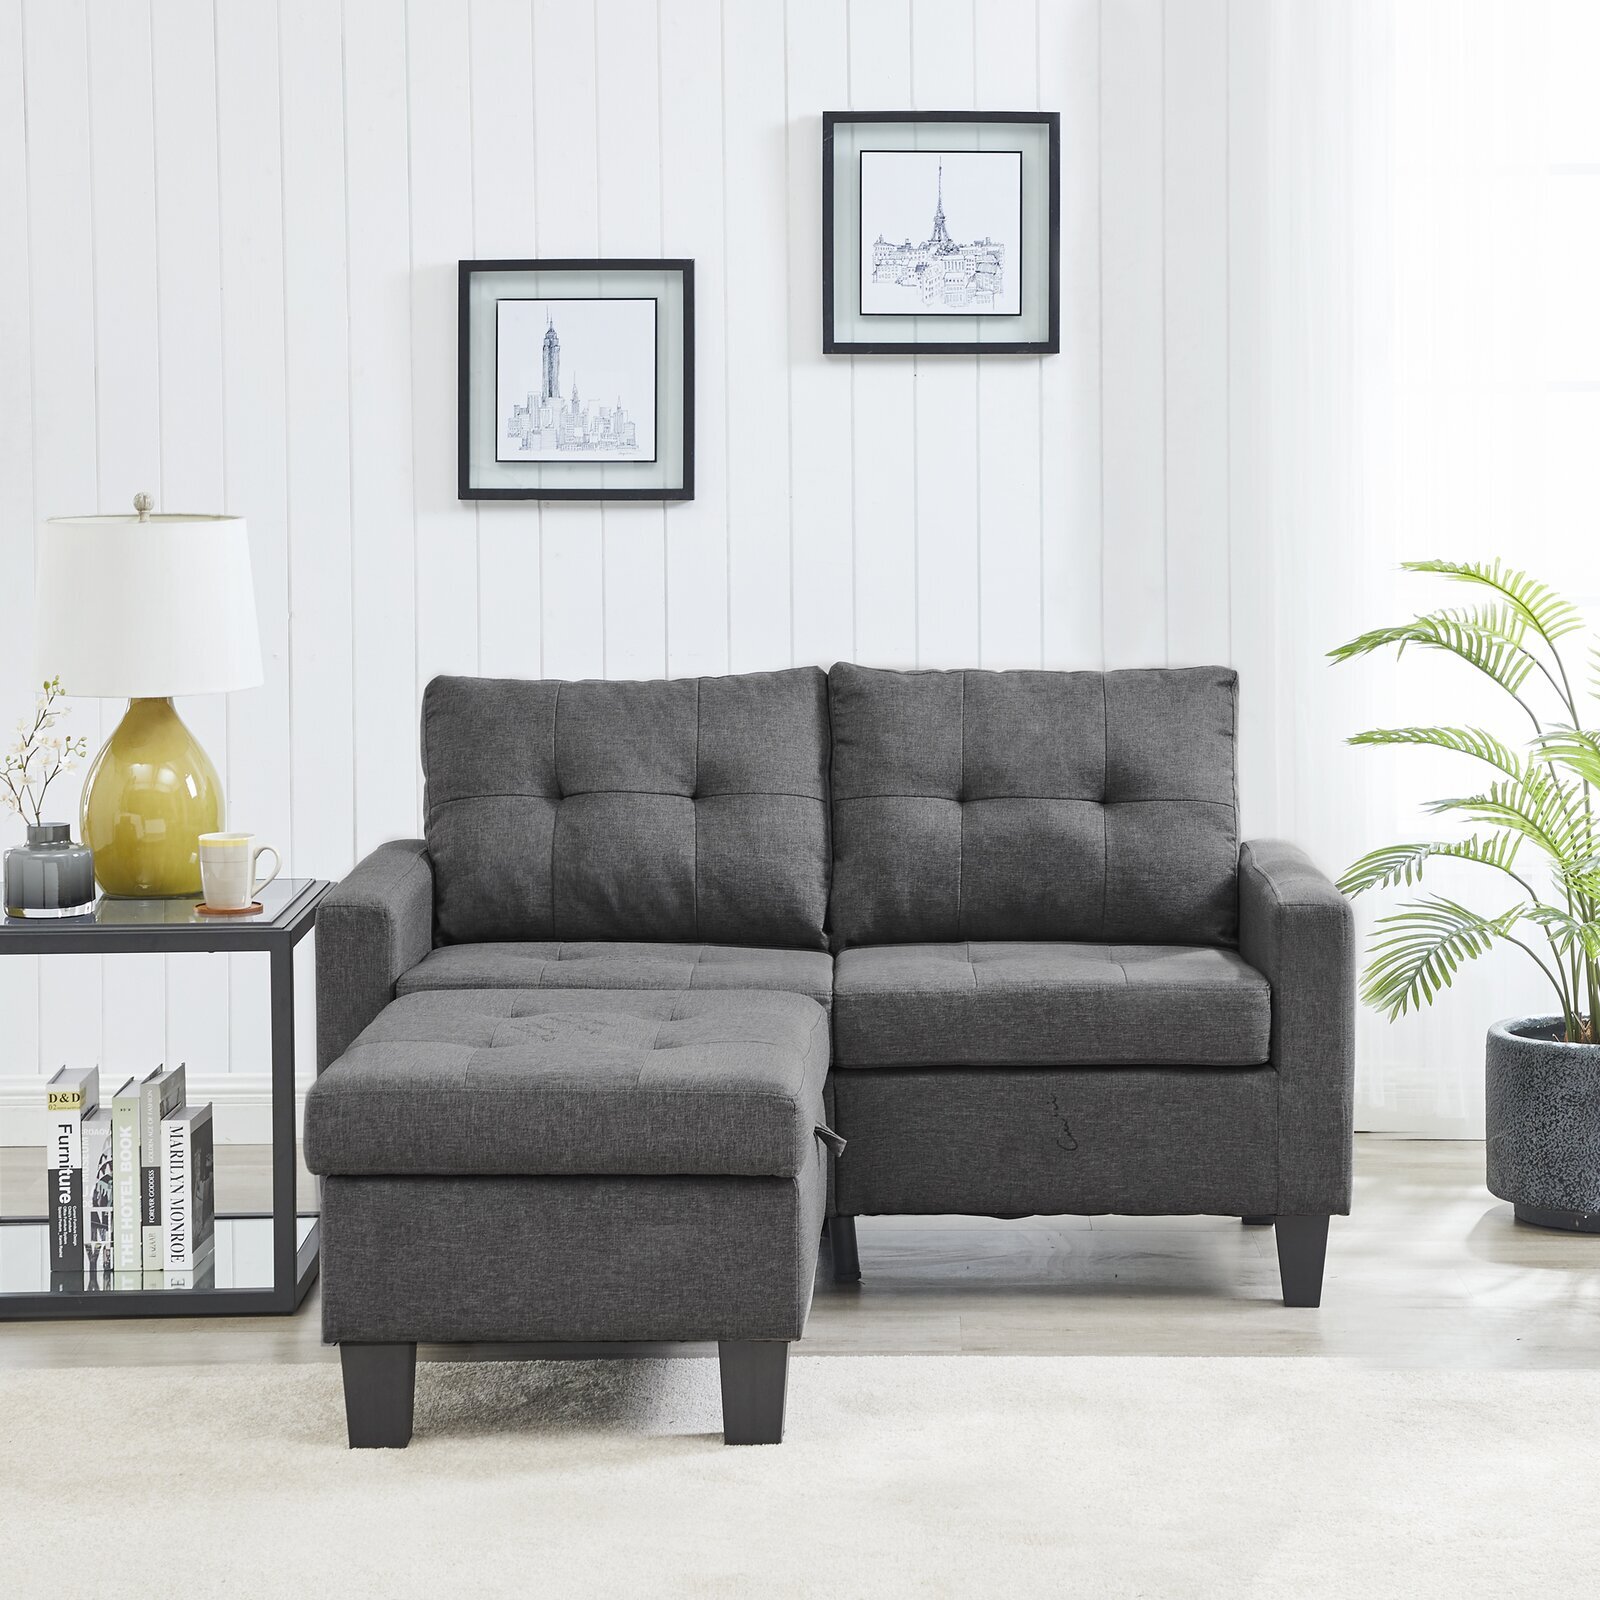 60 inch sectional sofa or loveseat for your small space